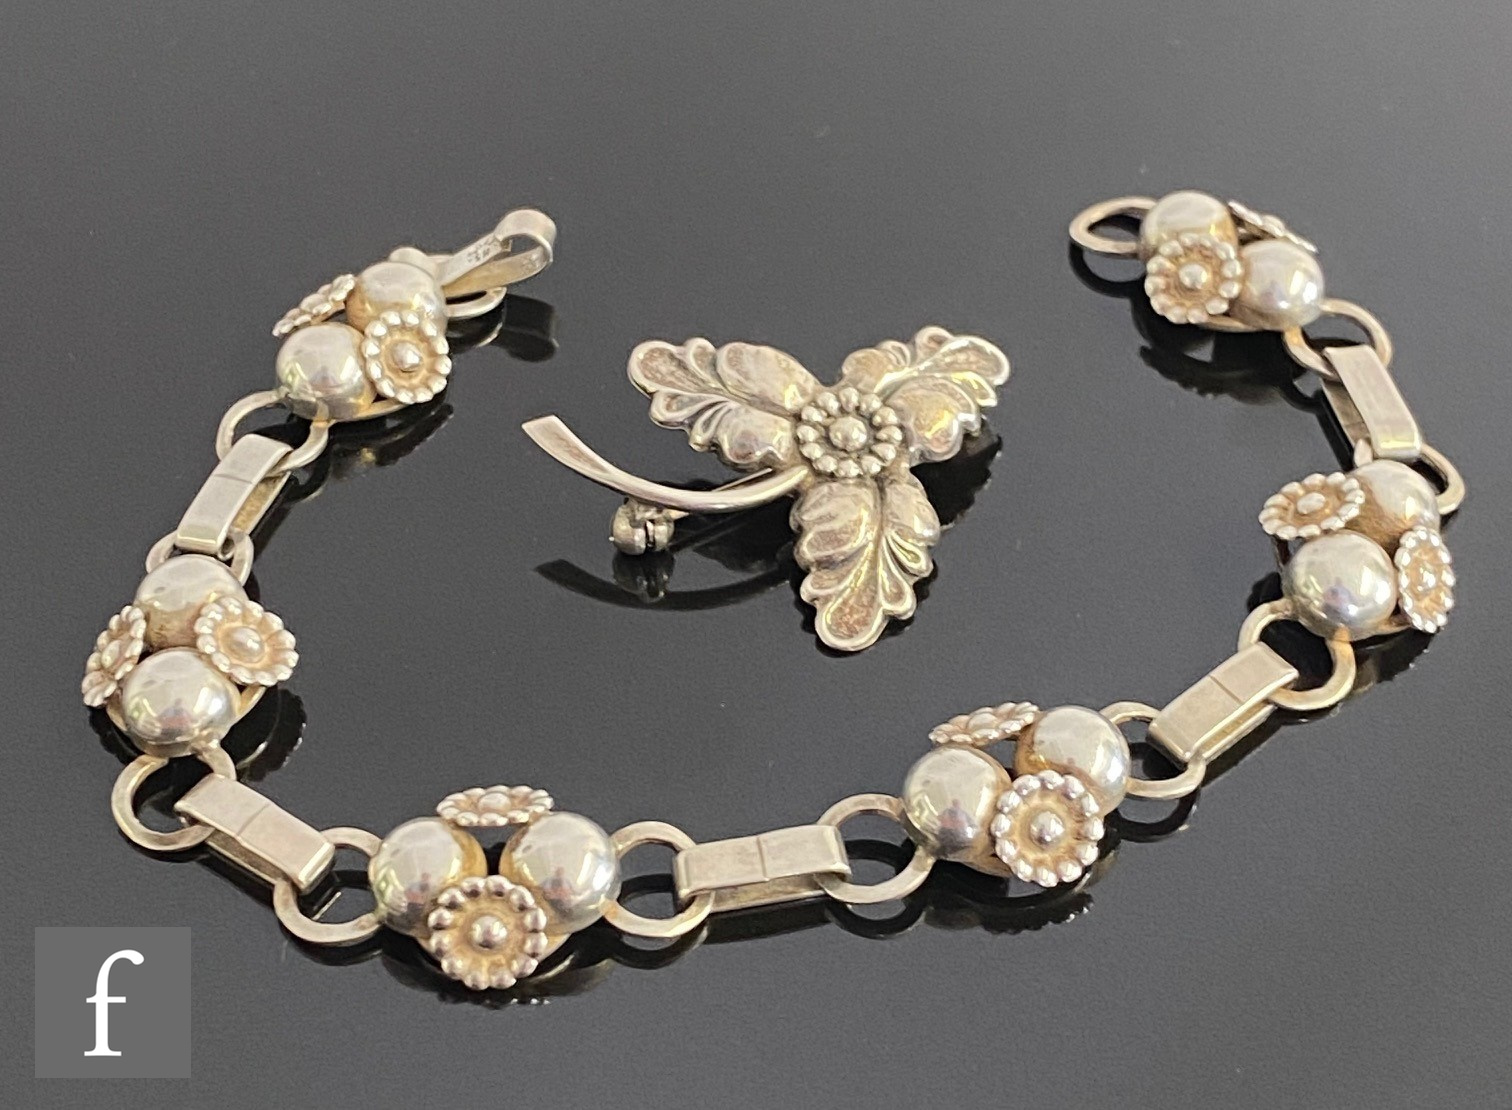 A Danish silver bracelet decorated with six stylised flower head sections, length 21cm, with a